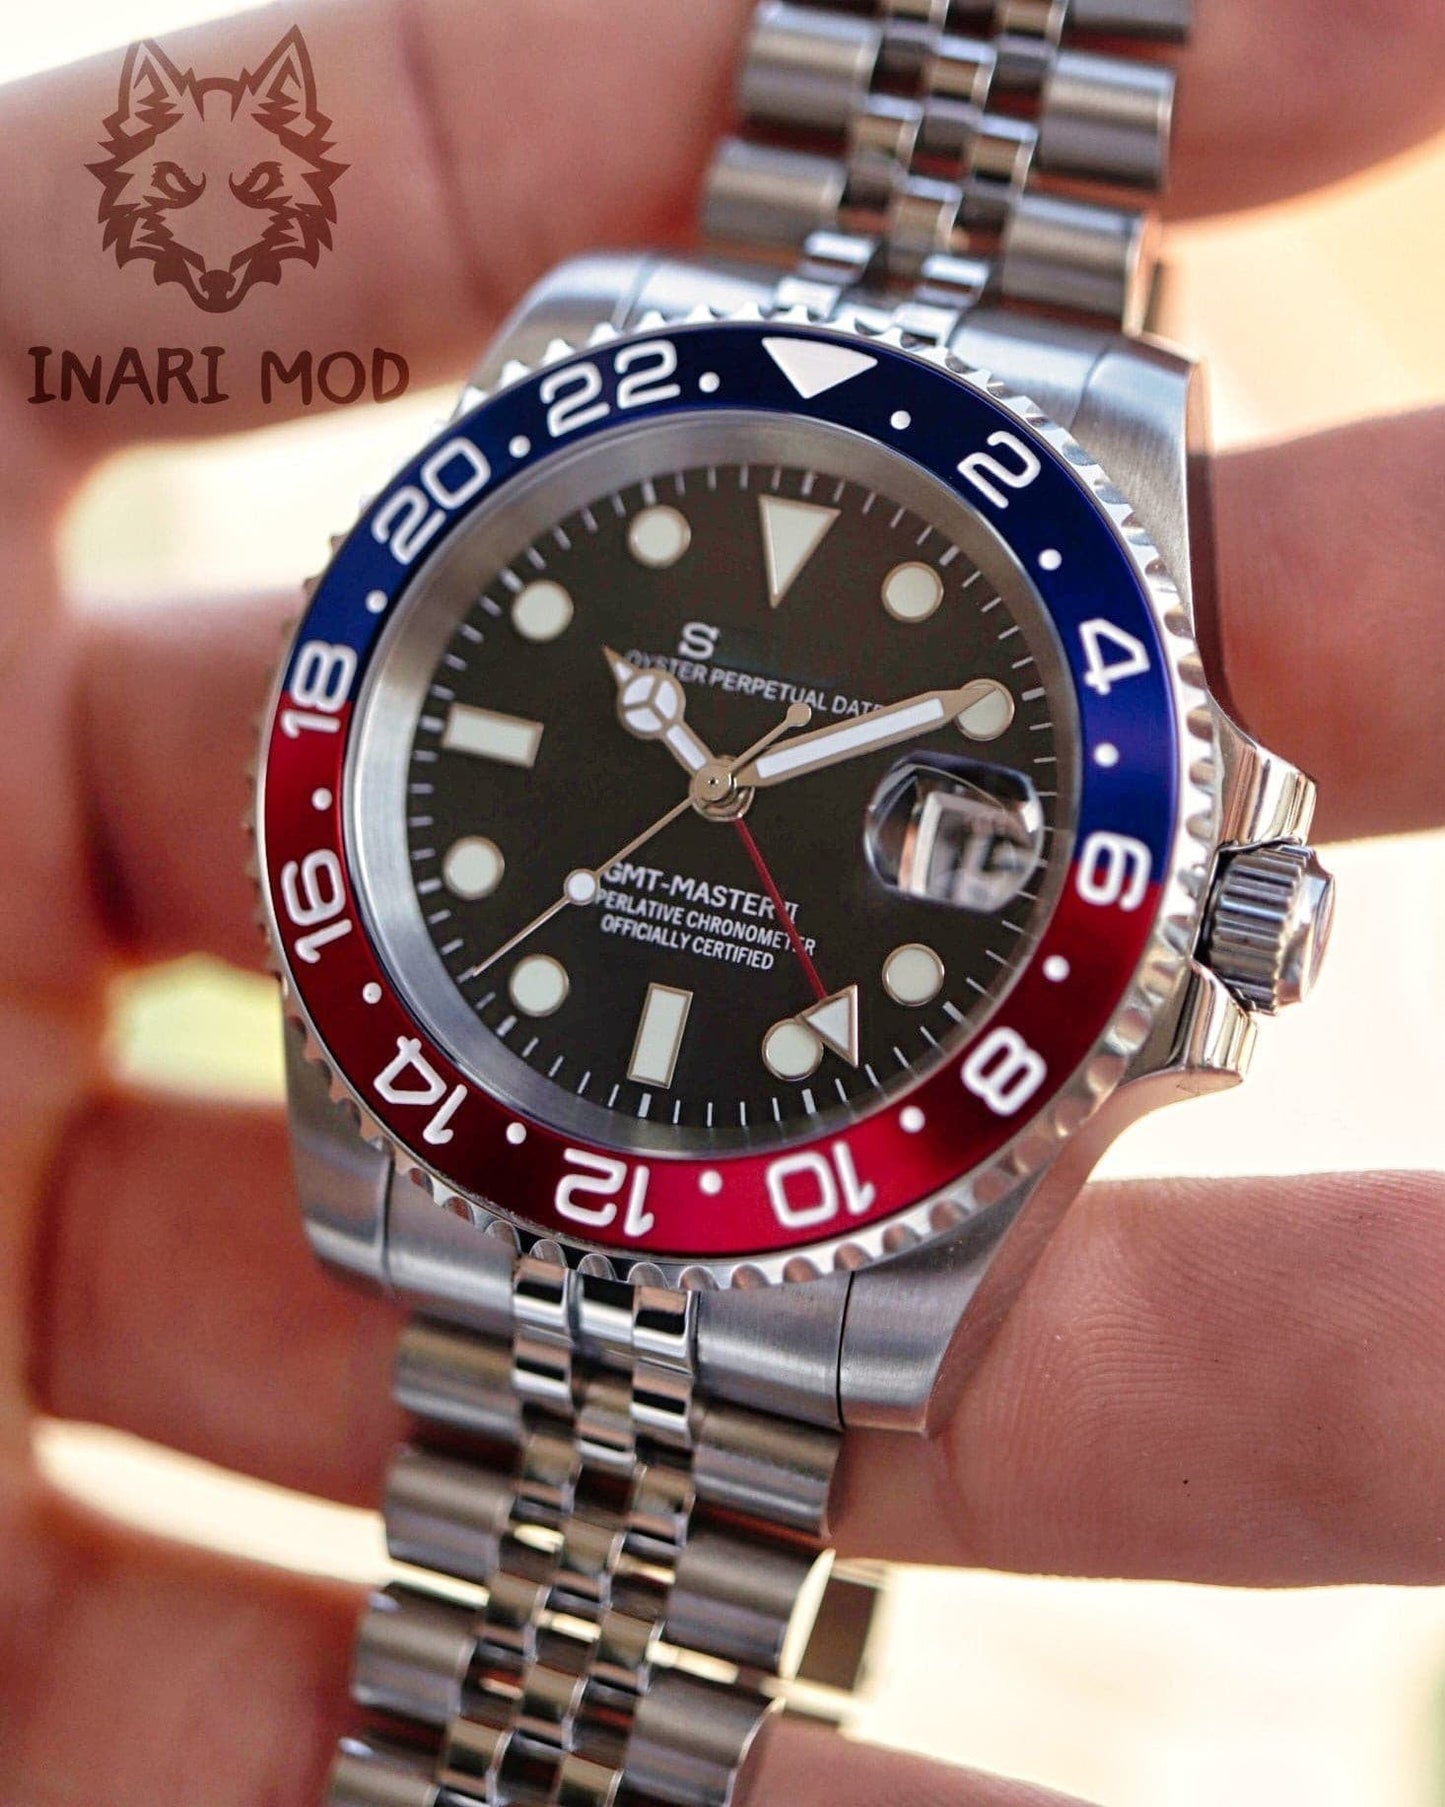 Seiko Mod Pepsi GMT from Inarimod for 359.90